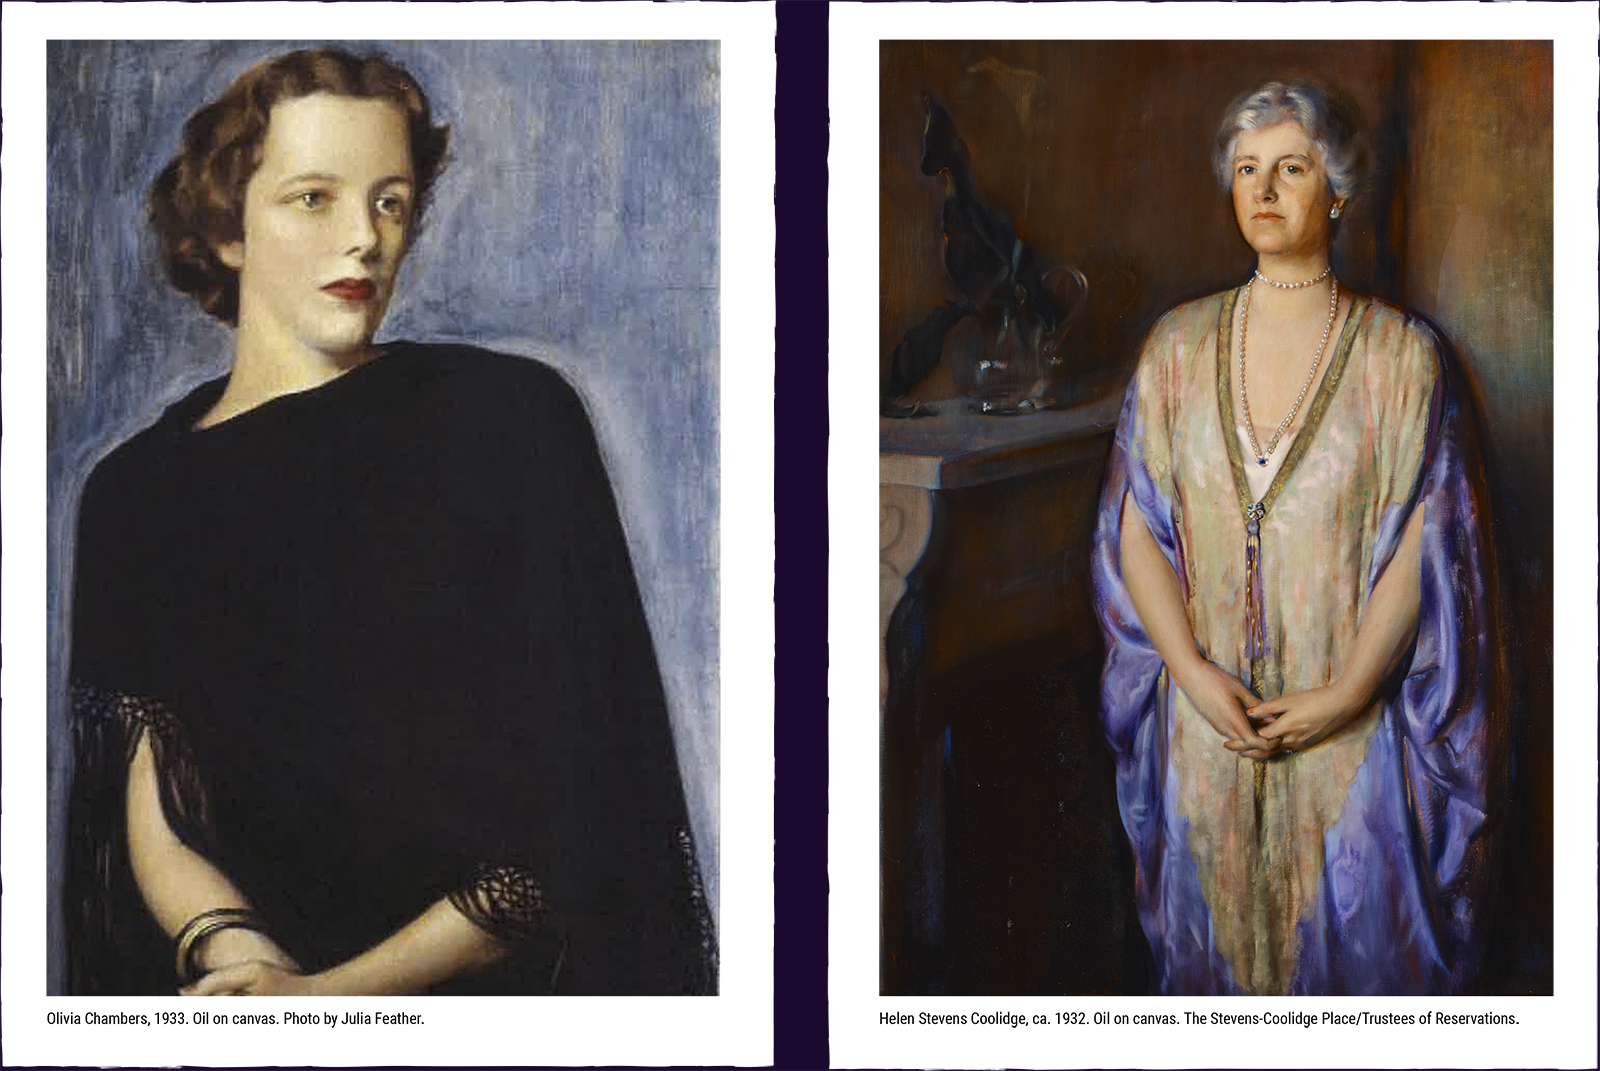 Two portrait paintings. (1) Olivia Chambers, 1933. Oil on canvas. Fruitlands Museum, Harvard, MA. Photo by Julia Feather. (2) Helen Stevens Coolidge, 1932. Oil on canvas. Private collection.